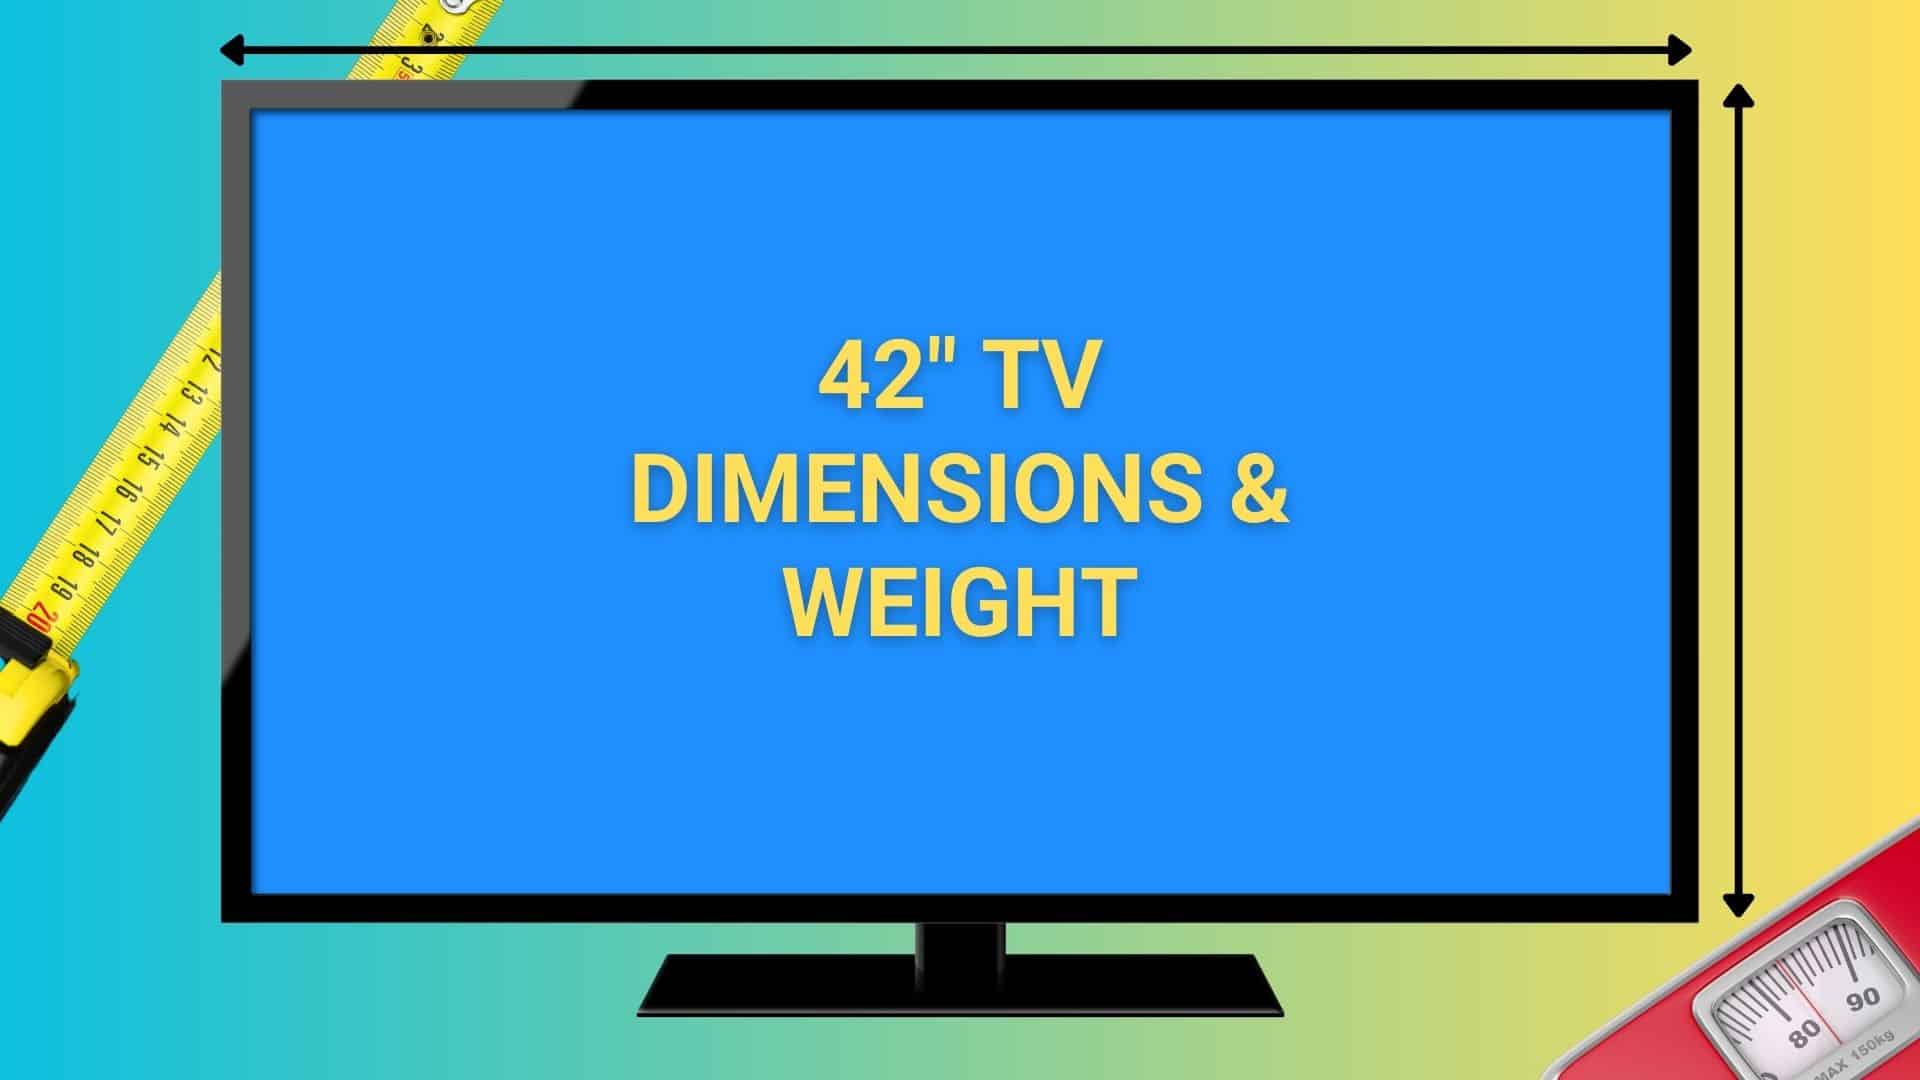 Image of 42 inch TV with measuring tape and bath scale in background.